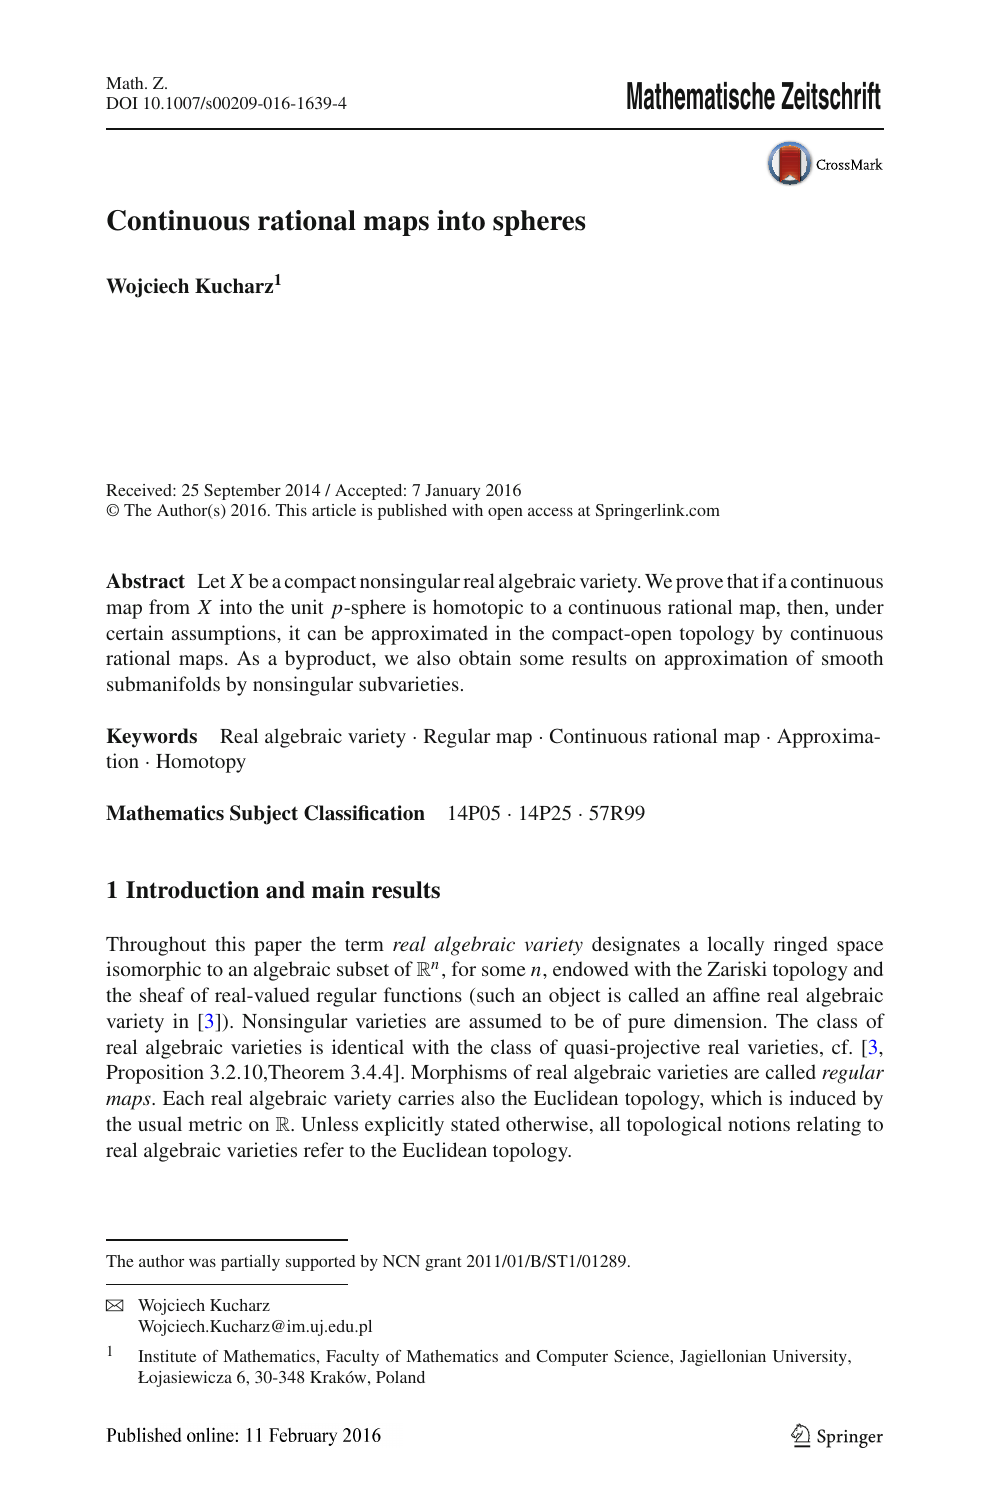 Continuous Rational Maps Into Spheres Topic Of Research Paper In Mathematics Download Scholarly Article Pdf And Read For Free On Cyberleninka Open Science Hub